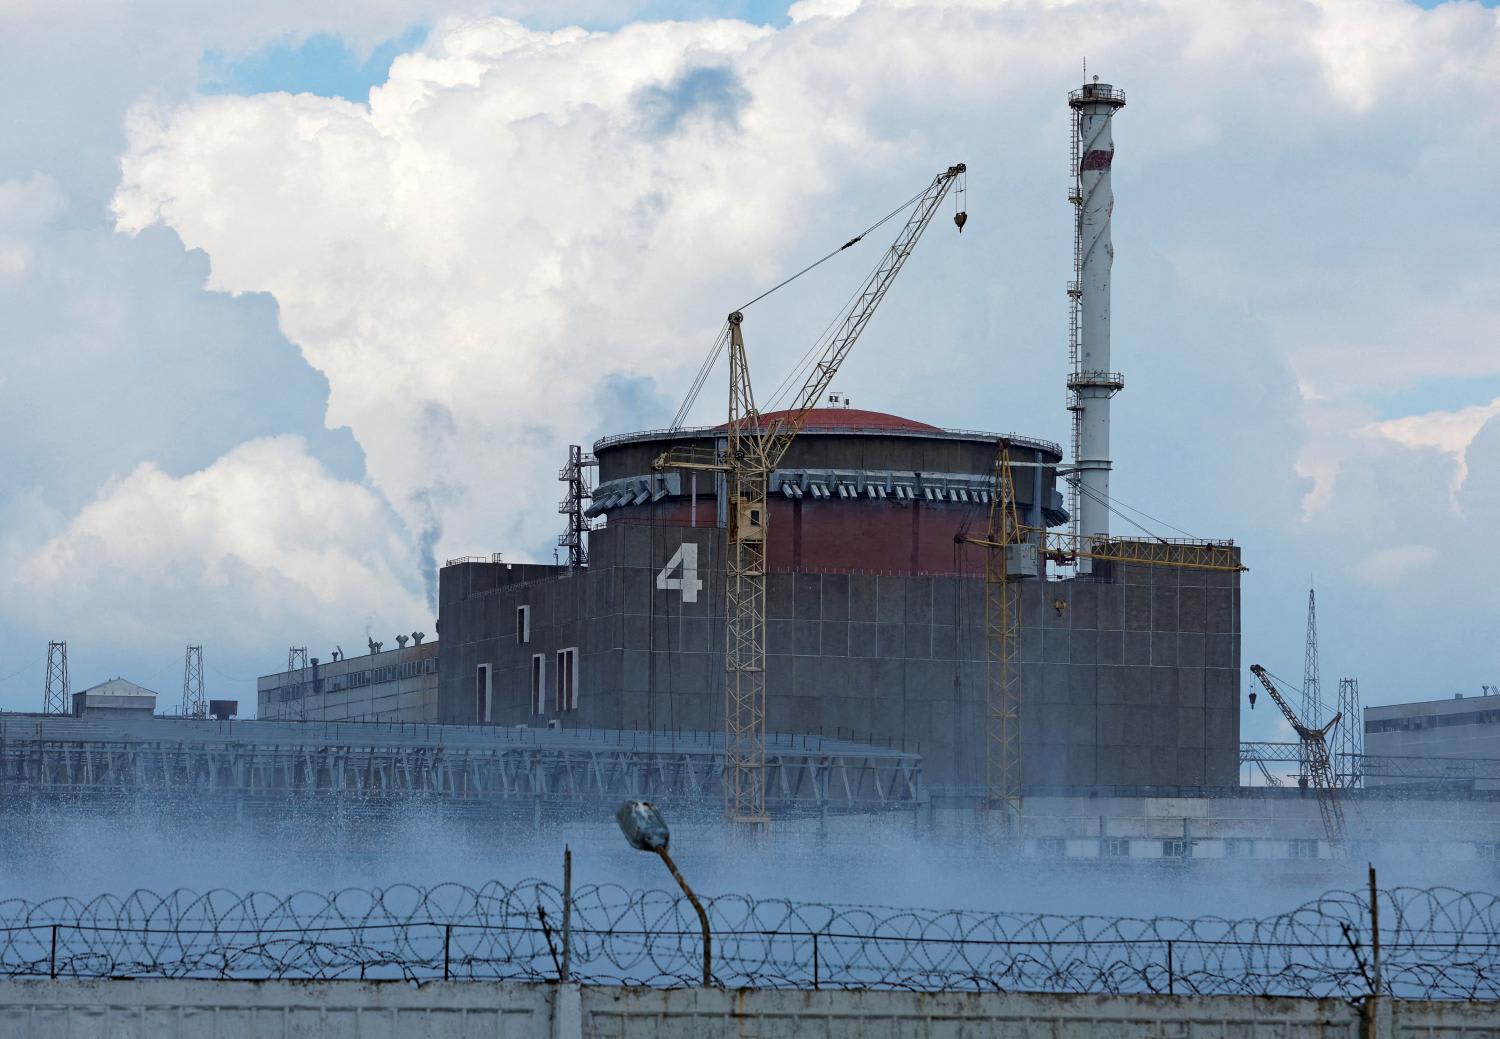 A view shows the Zaporizhzhia Nuclear Power Plant in the course of Ukraine-Russia conflict outside the Russian-controlled city of Enerhodar in the Zaporizhzhia region, Ukraine Aug 4, 2022.